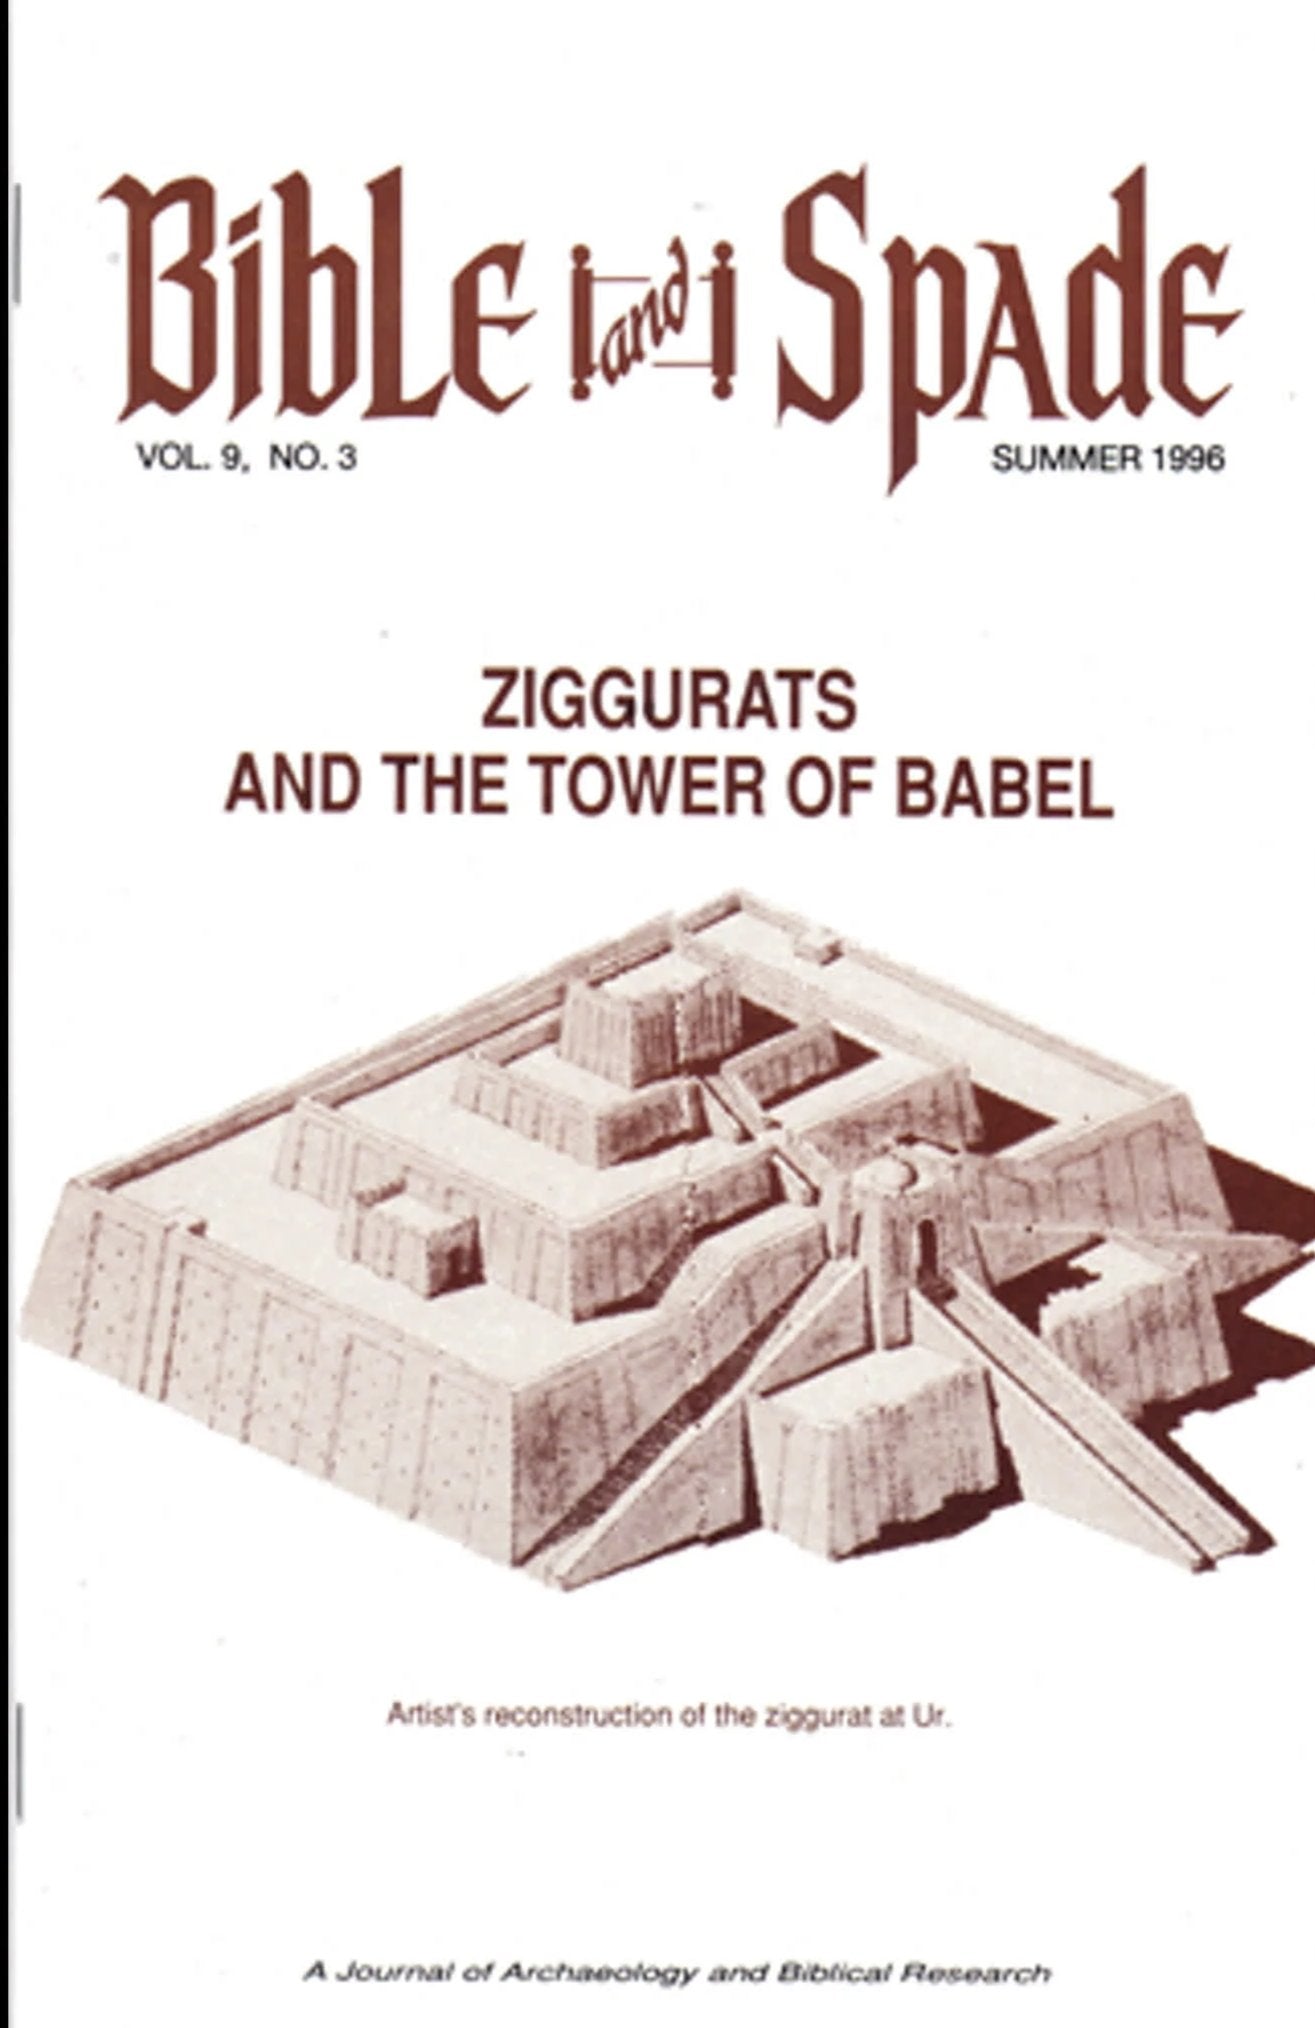 Four issues of BIBLE and SPADE produced in 1996